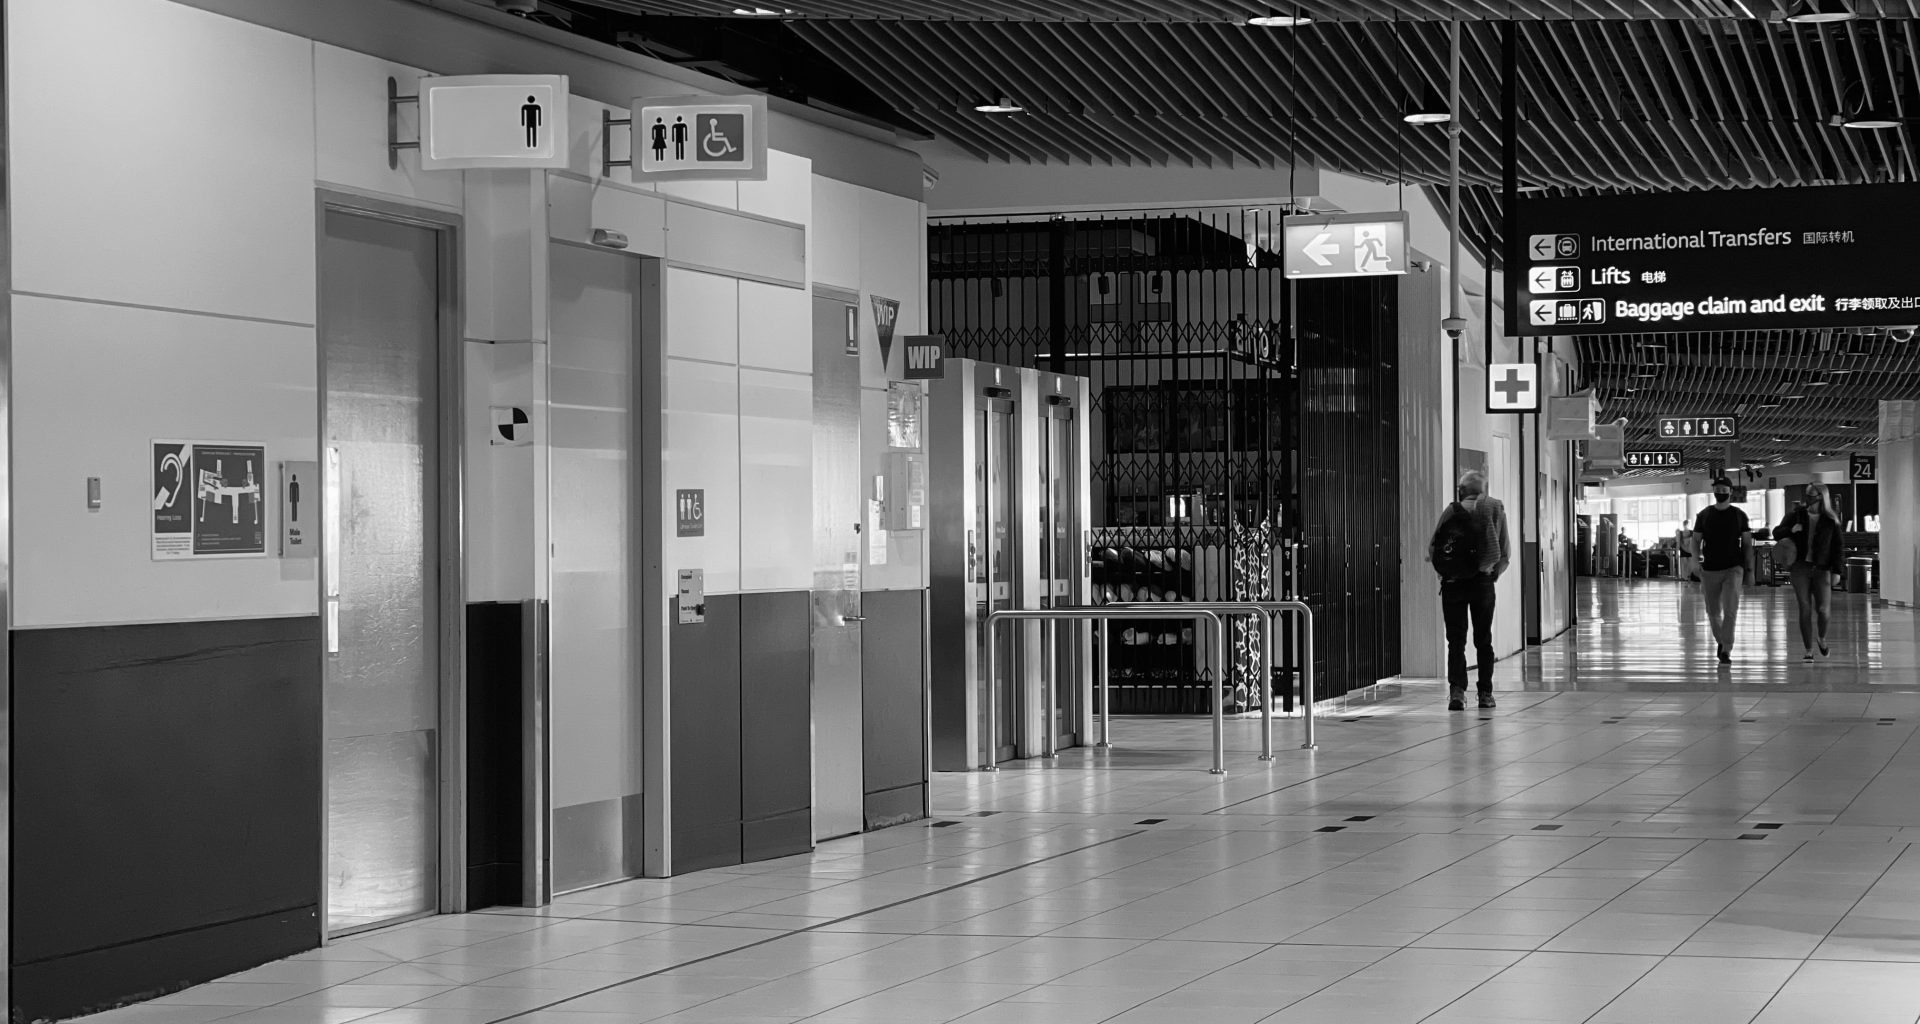 Black and white image of inside an almost deserted airport